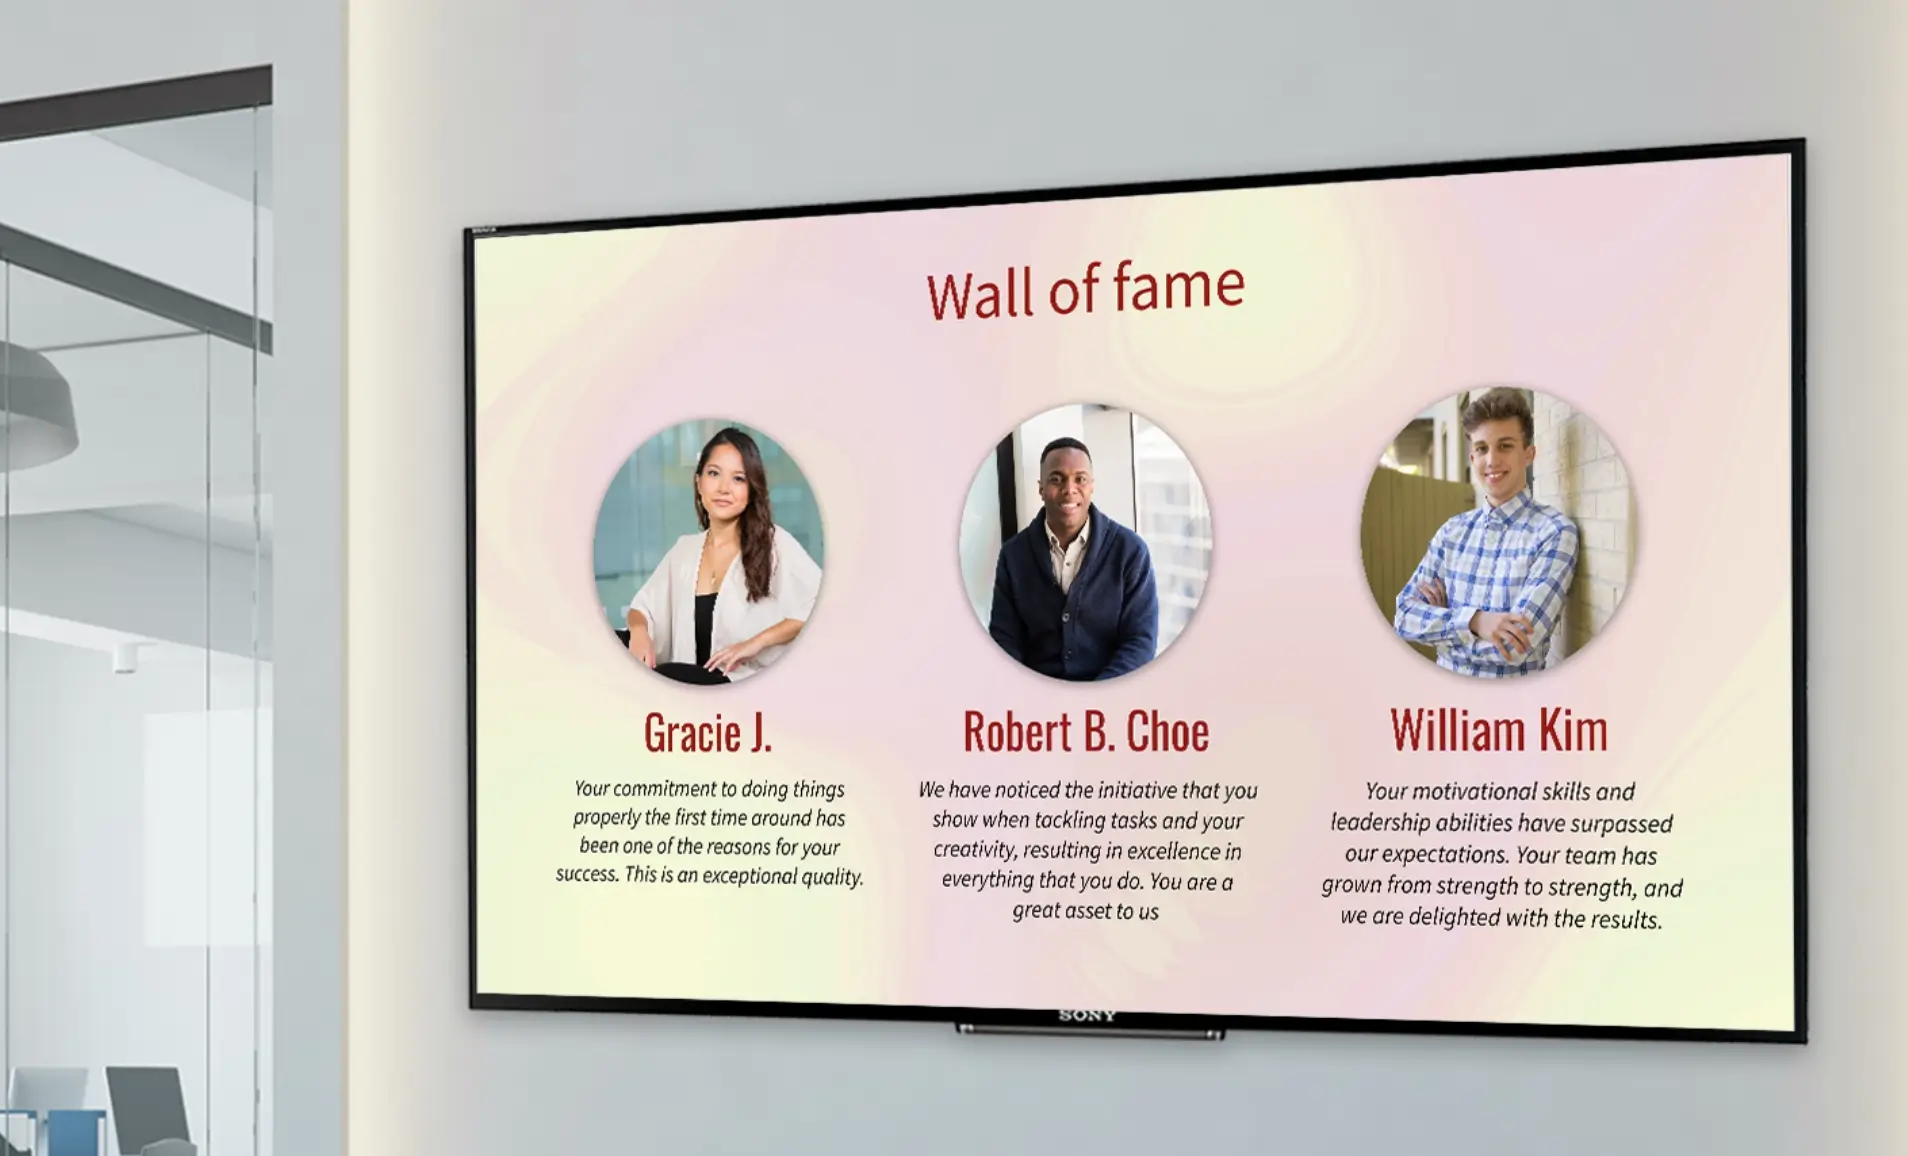 People Space App showing wall of fame of the start employees on the digital signage screen